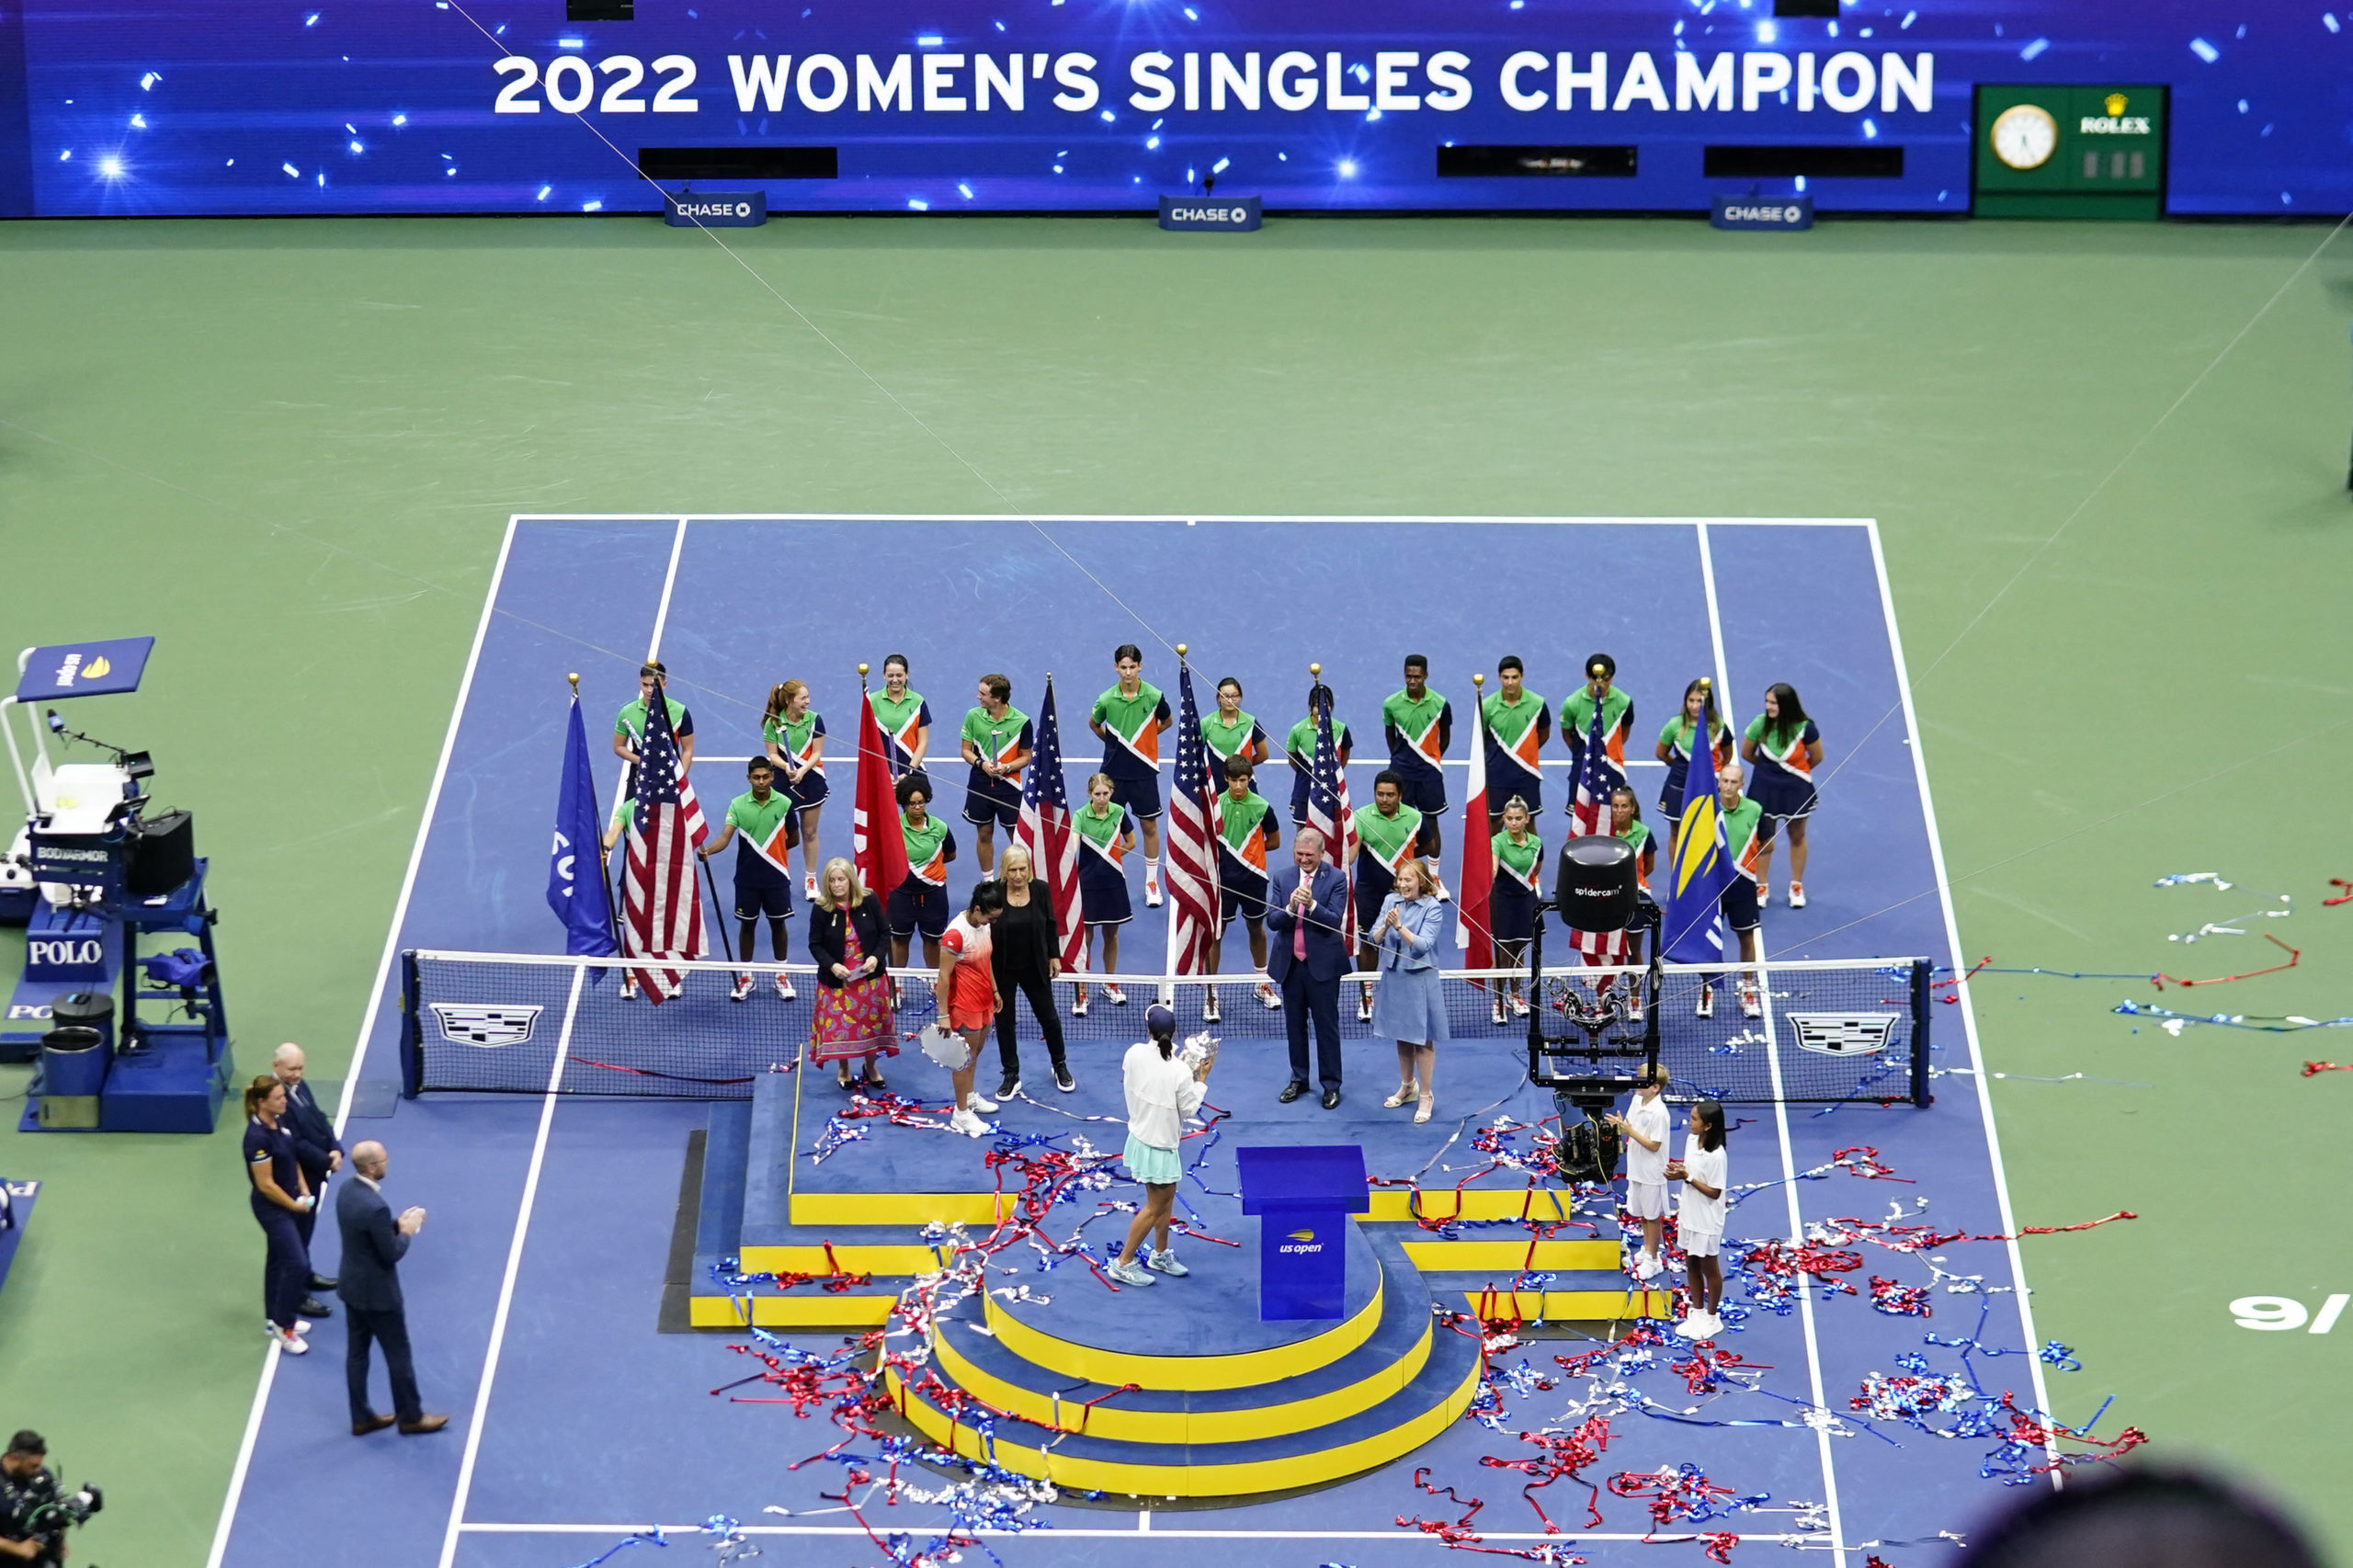 Iga Swiatek (POL) celebrates with the championship trophy after her match against Ons Jabeur (TUN) (L) in the women's singles final on day thirteen of the 2022 U.S. Open tennis tournament at USTA Billie Jean King Tennis Center. 